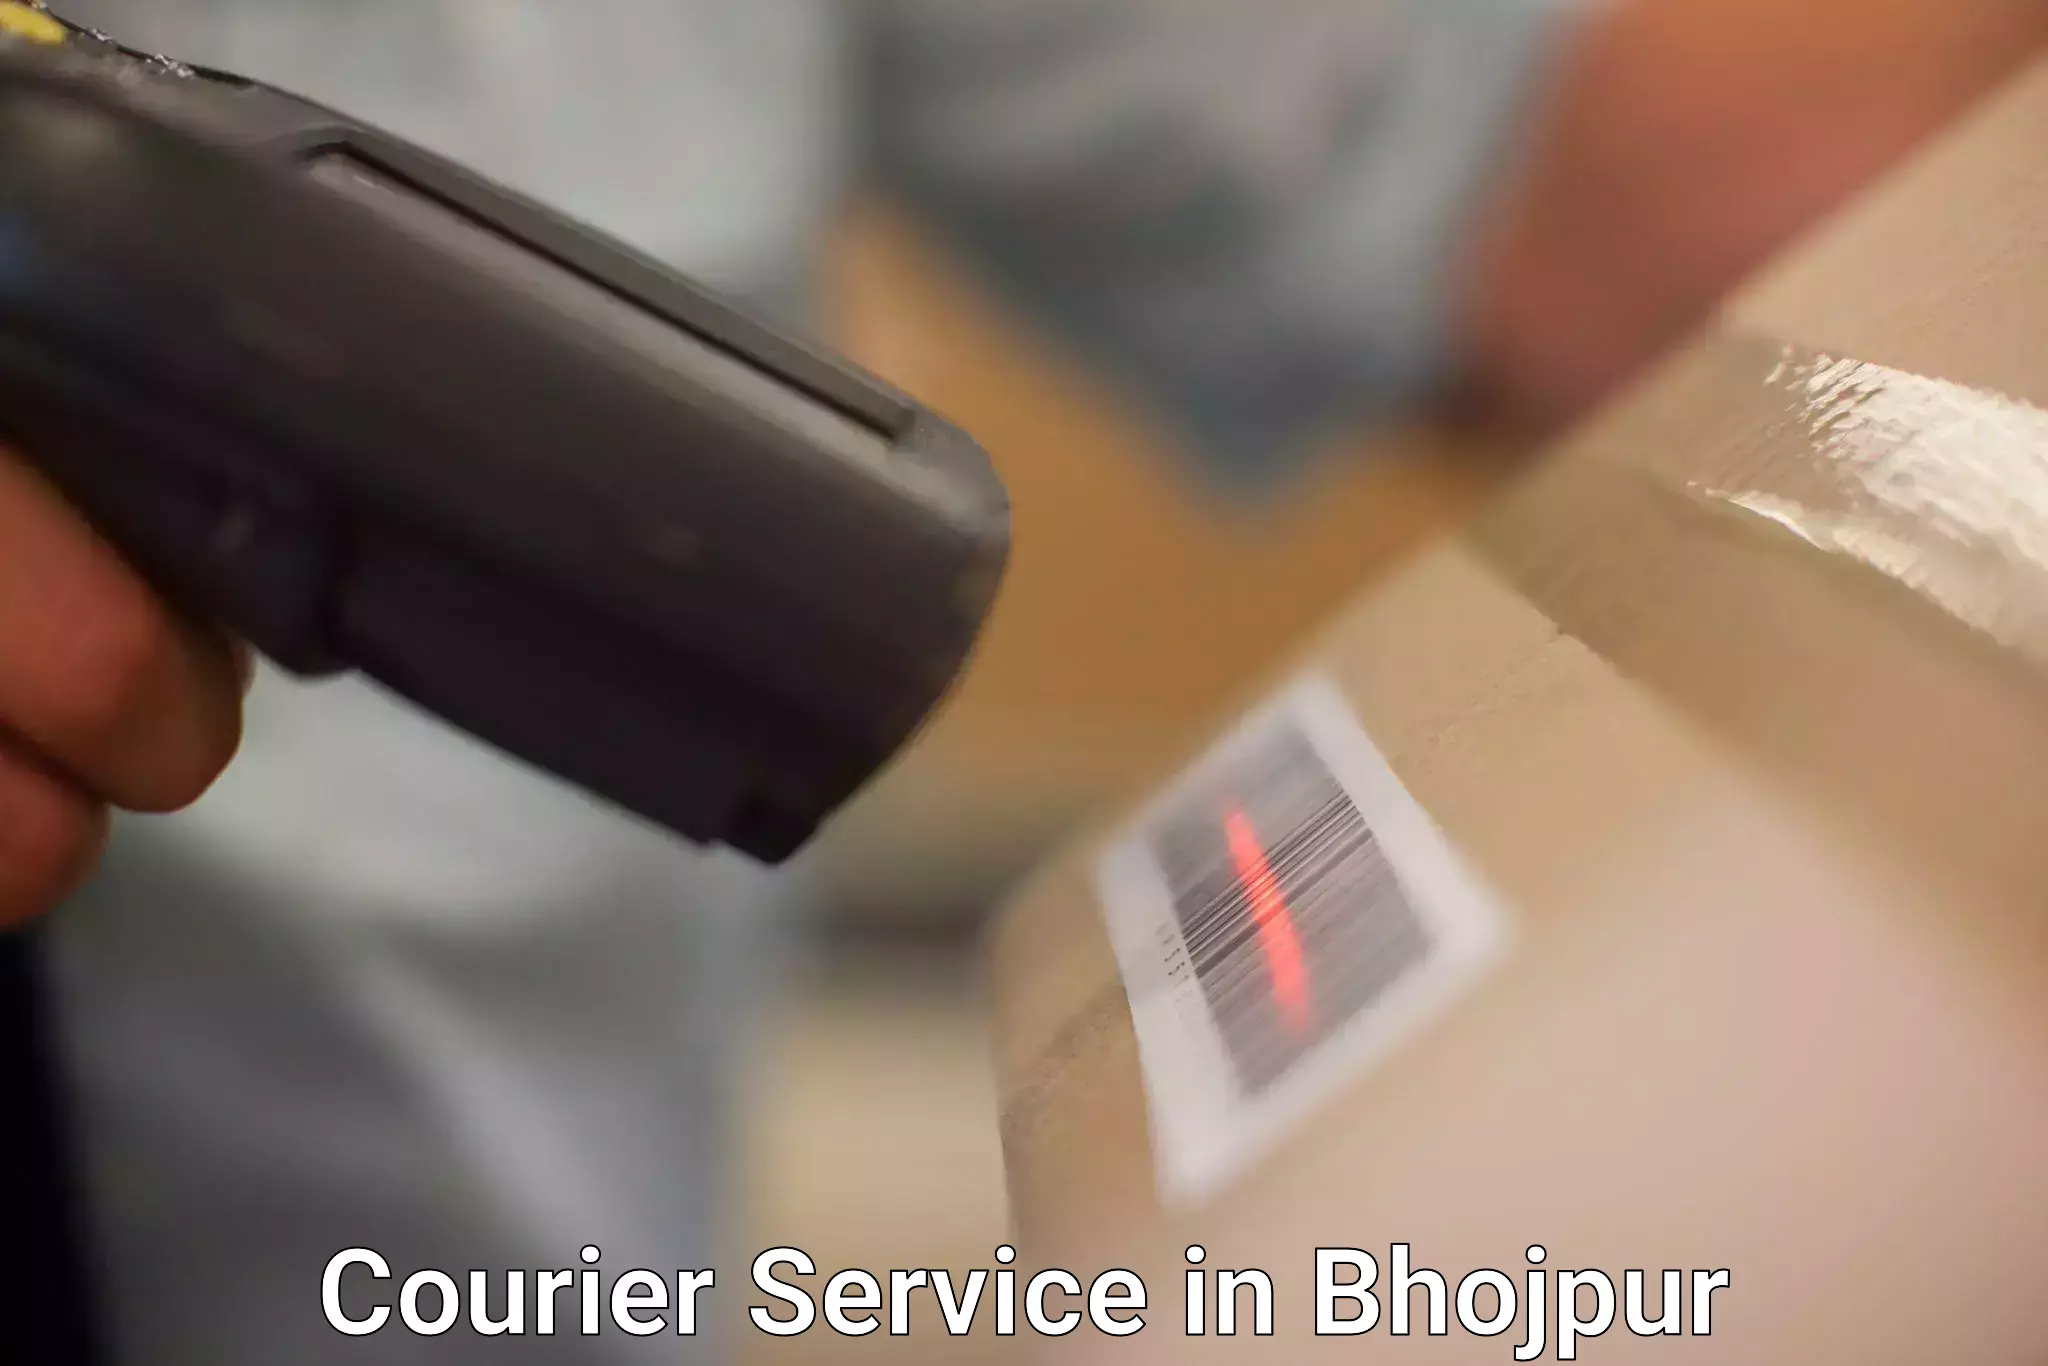 Customizable delivery plans in Bhojpur